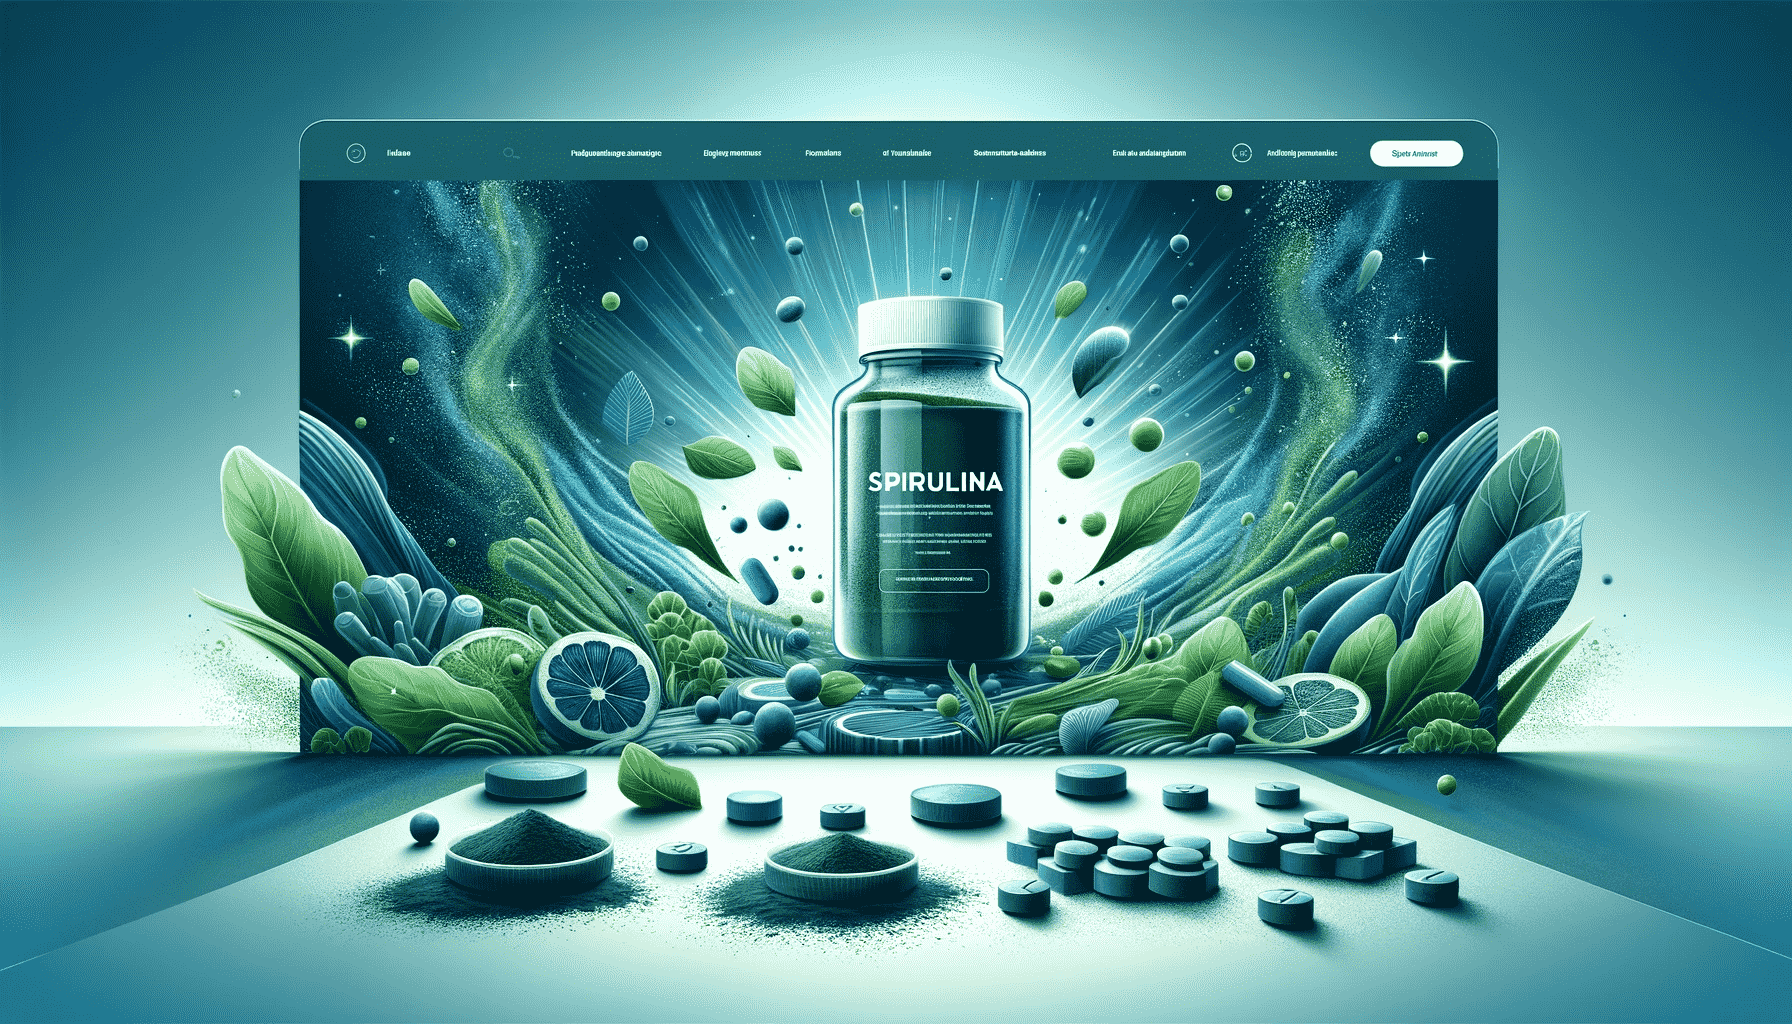 Spirulina Why It's Your New Superfood Hero